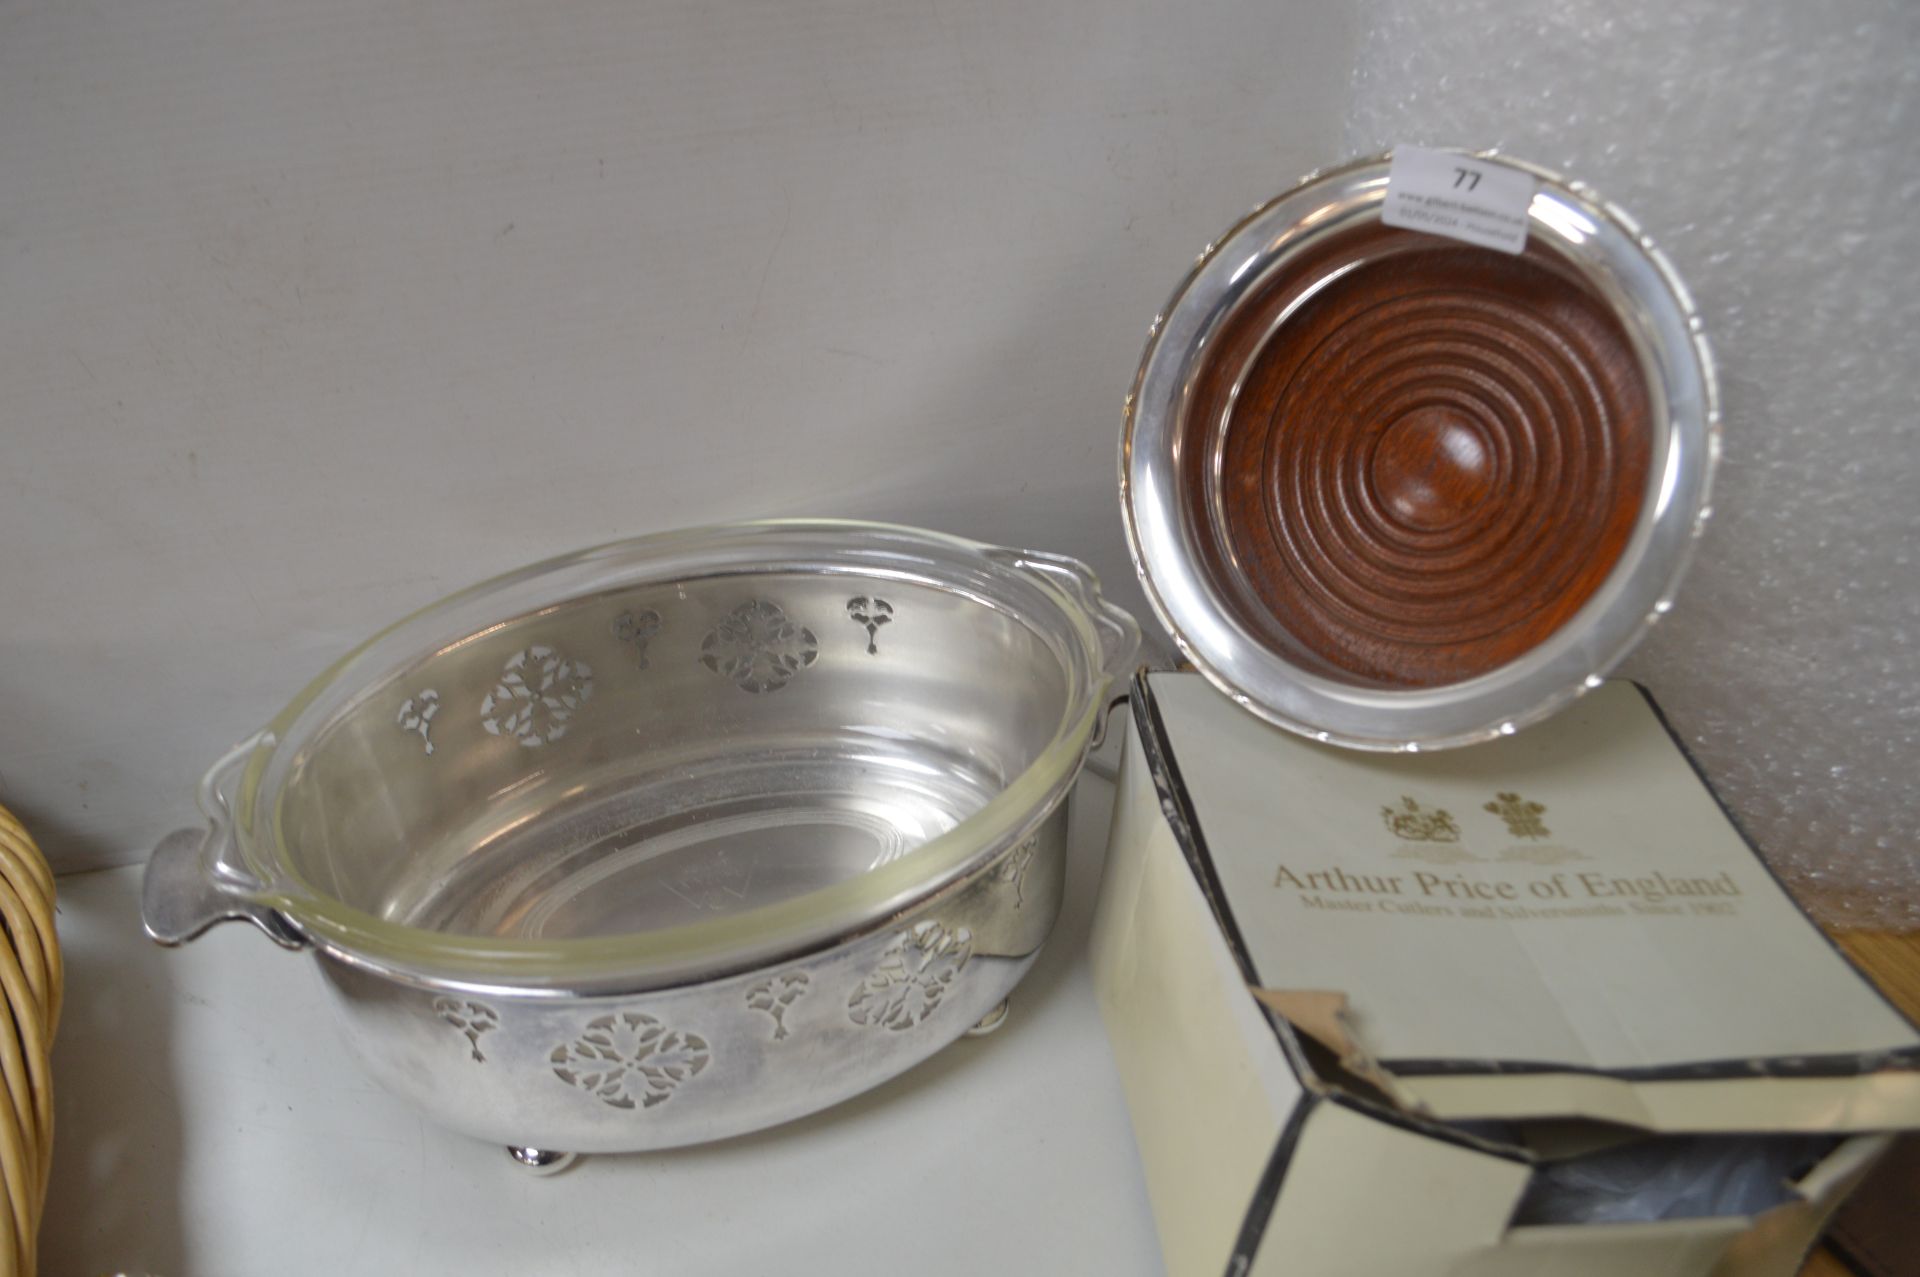 Maplin & Webb Serving Dish, and a Arthur Price Plated Coaster